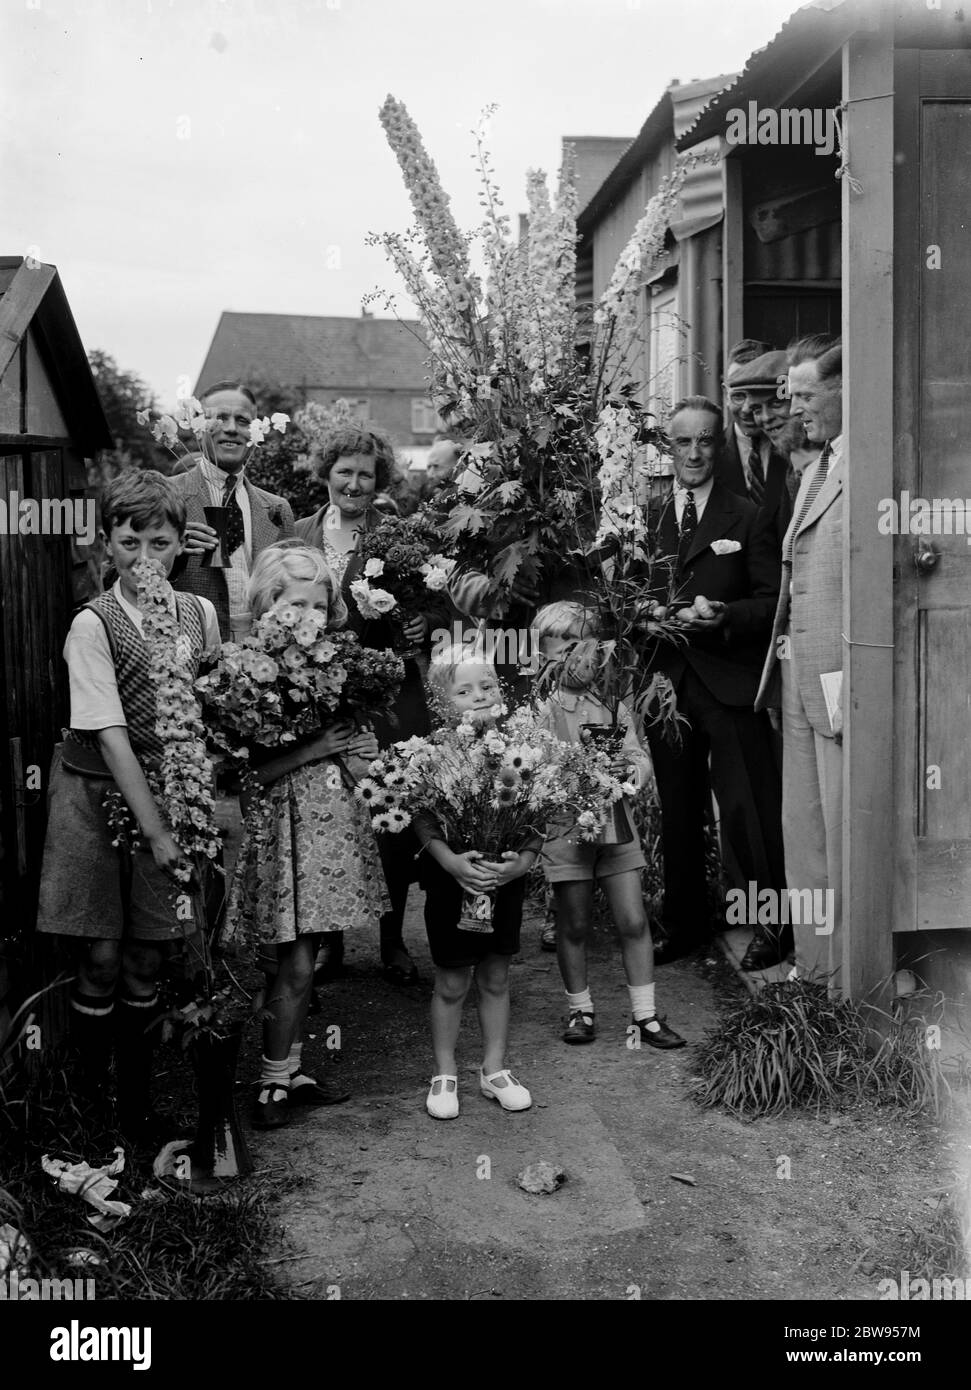 The Lamorbey flower show in Sidcup , Kent . 1936 Stock Photo